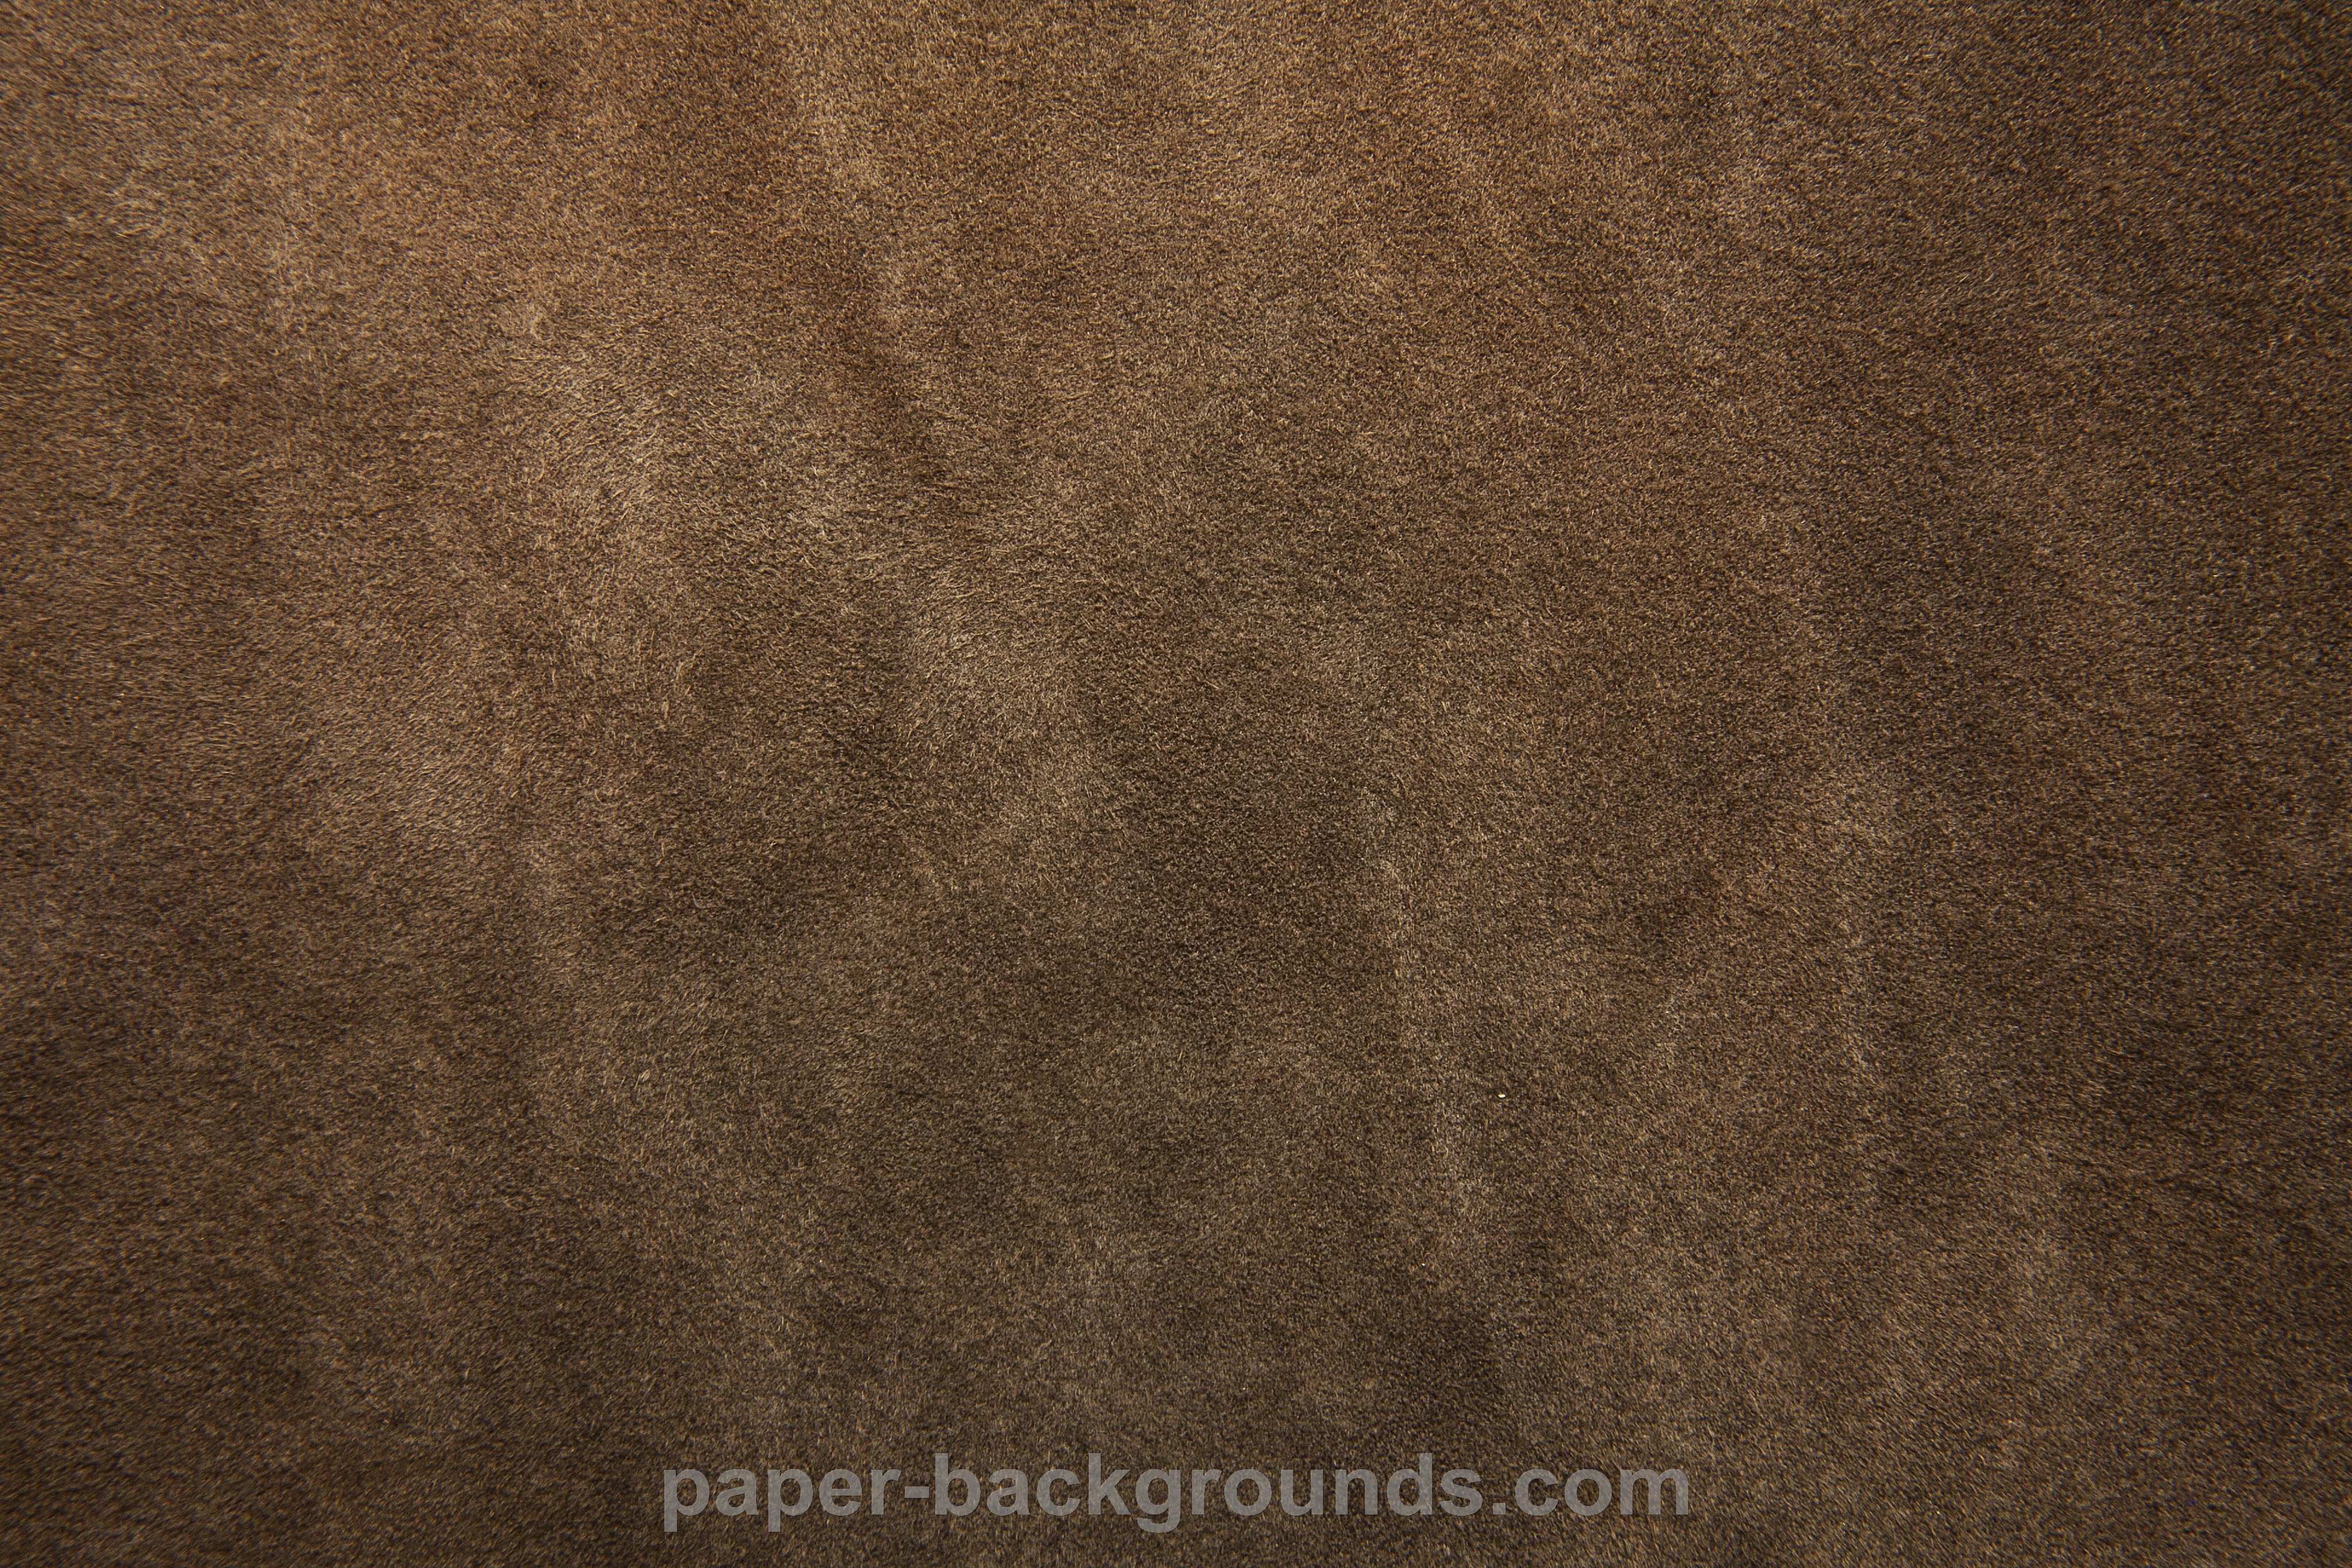 Brown Tanned Leather Texture Background High Resolution 4096 x 2731